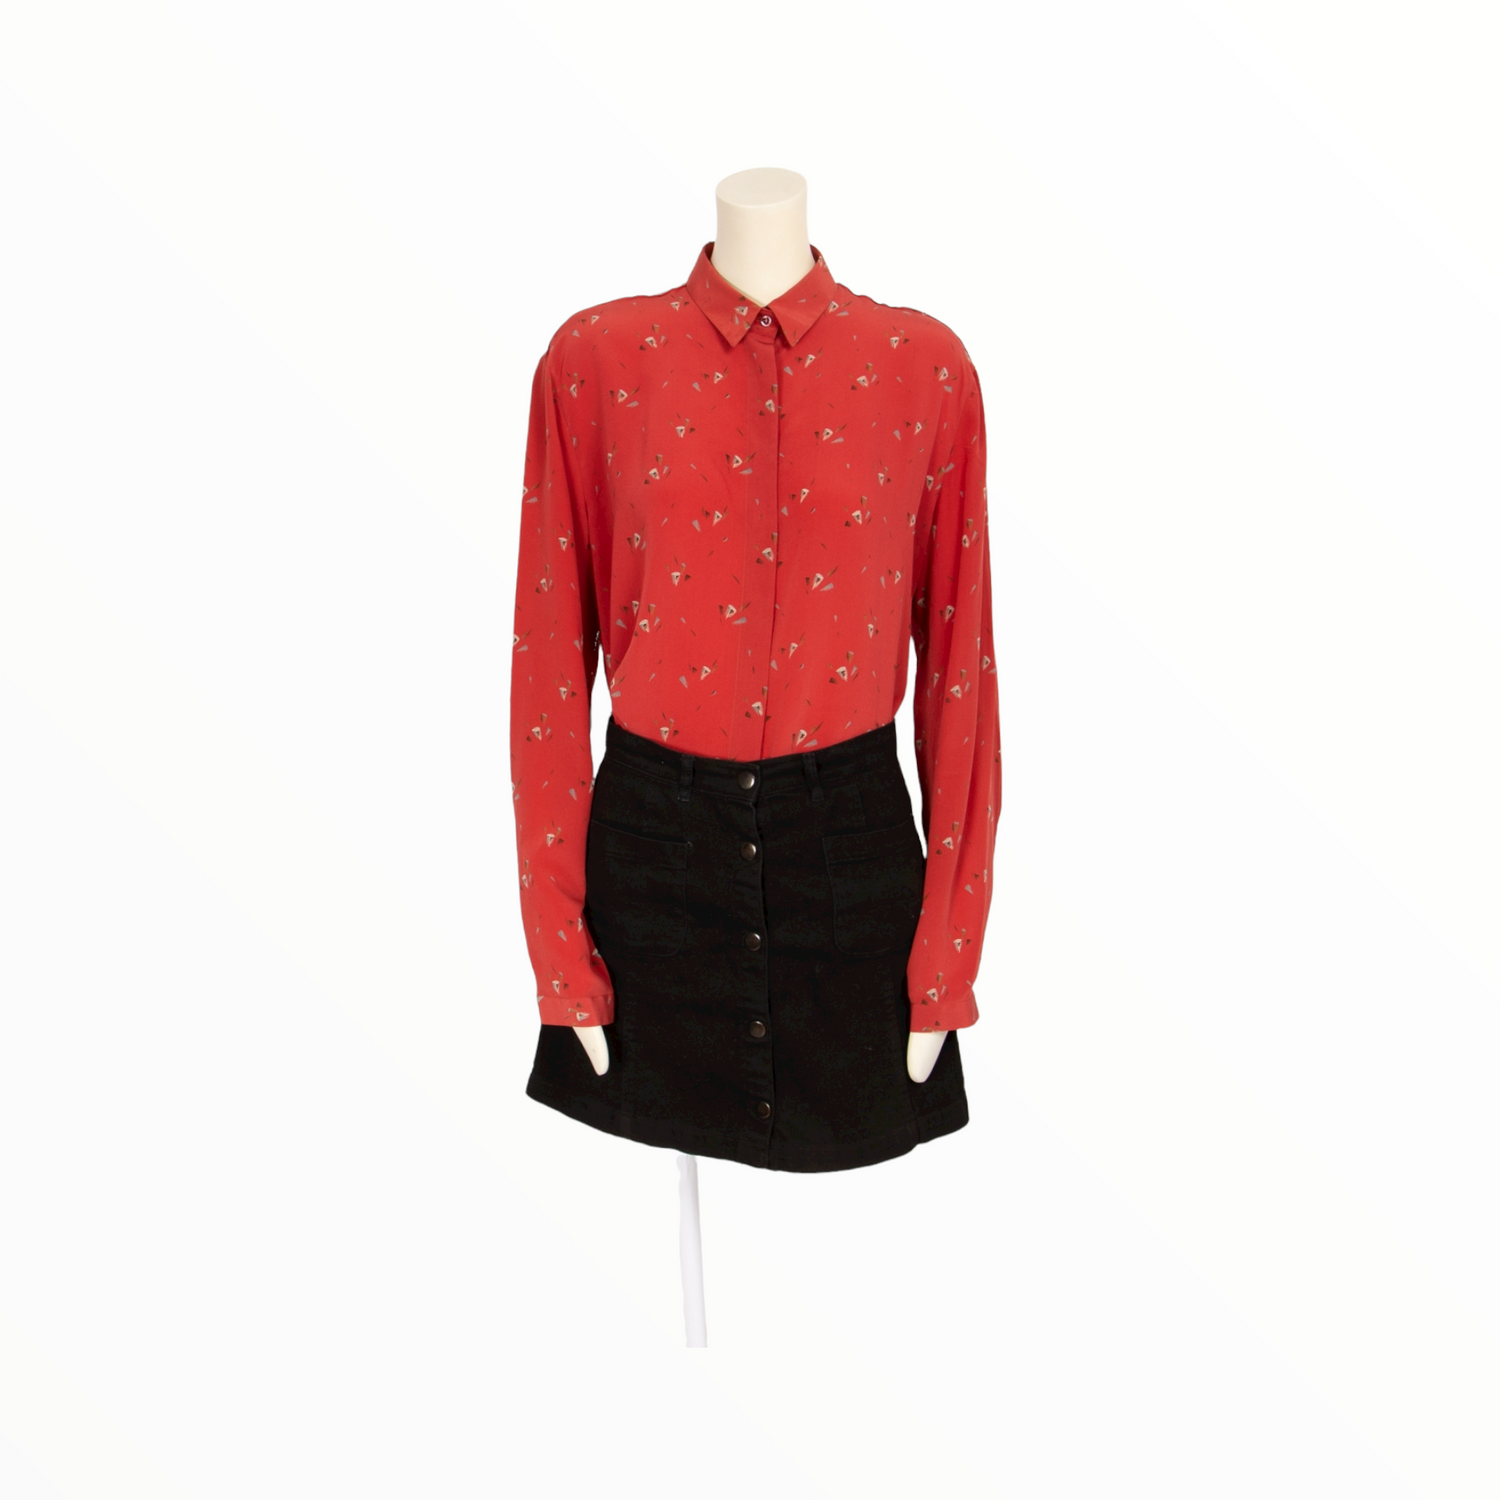 Christian Dior vintage coral red silk shirt - L - 1990s